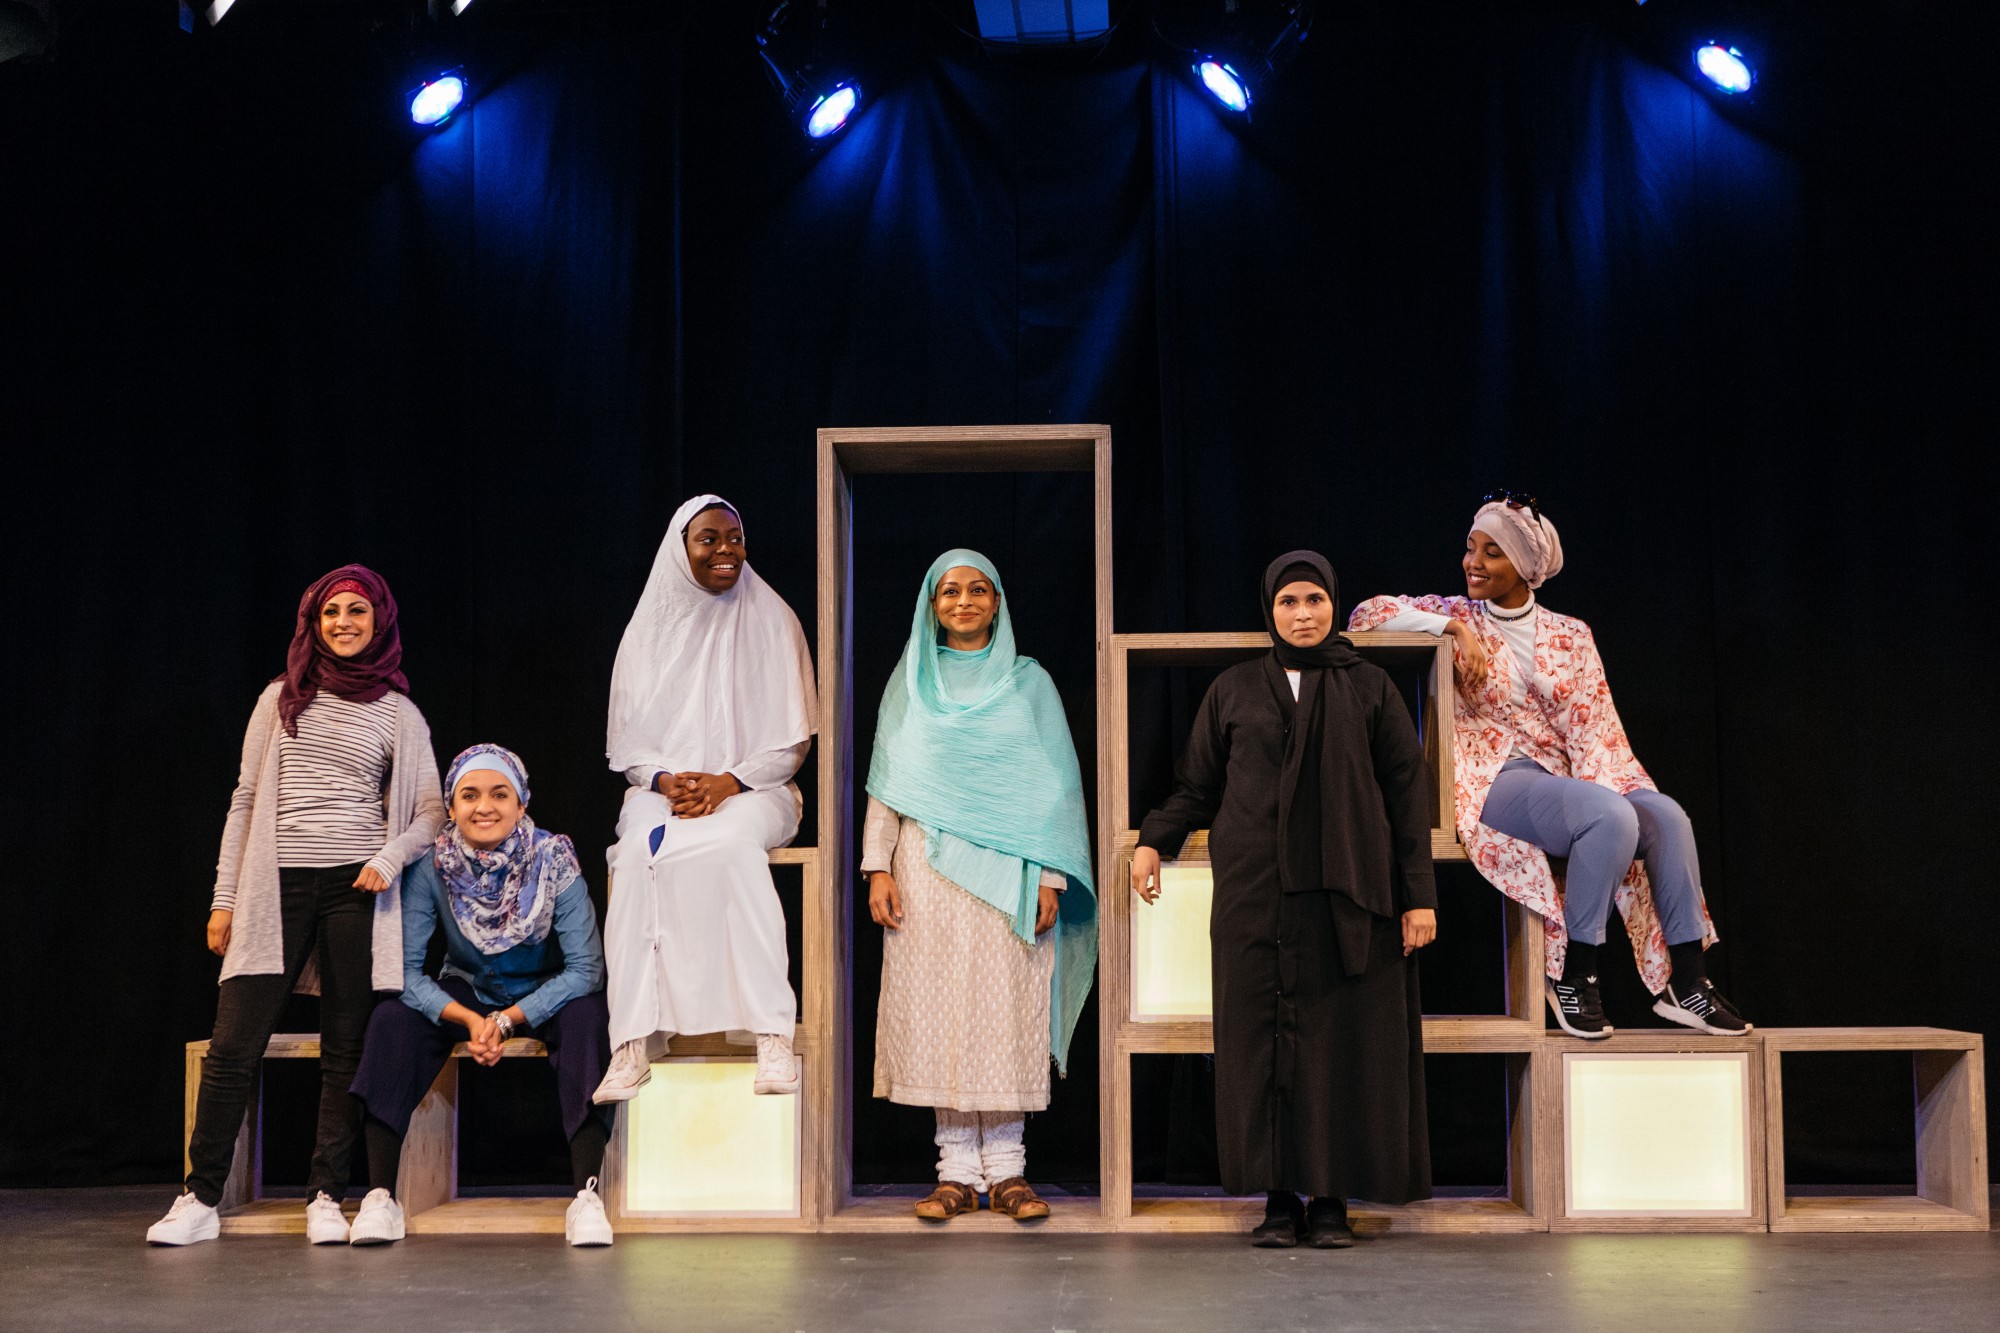 Cast-of-Hijabi-Monologues-London-directed-by-Milli-Bhatia-13-©helenmurray-2000x1333.jpg